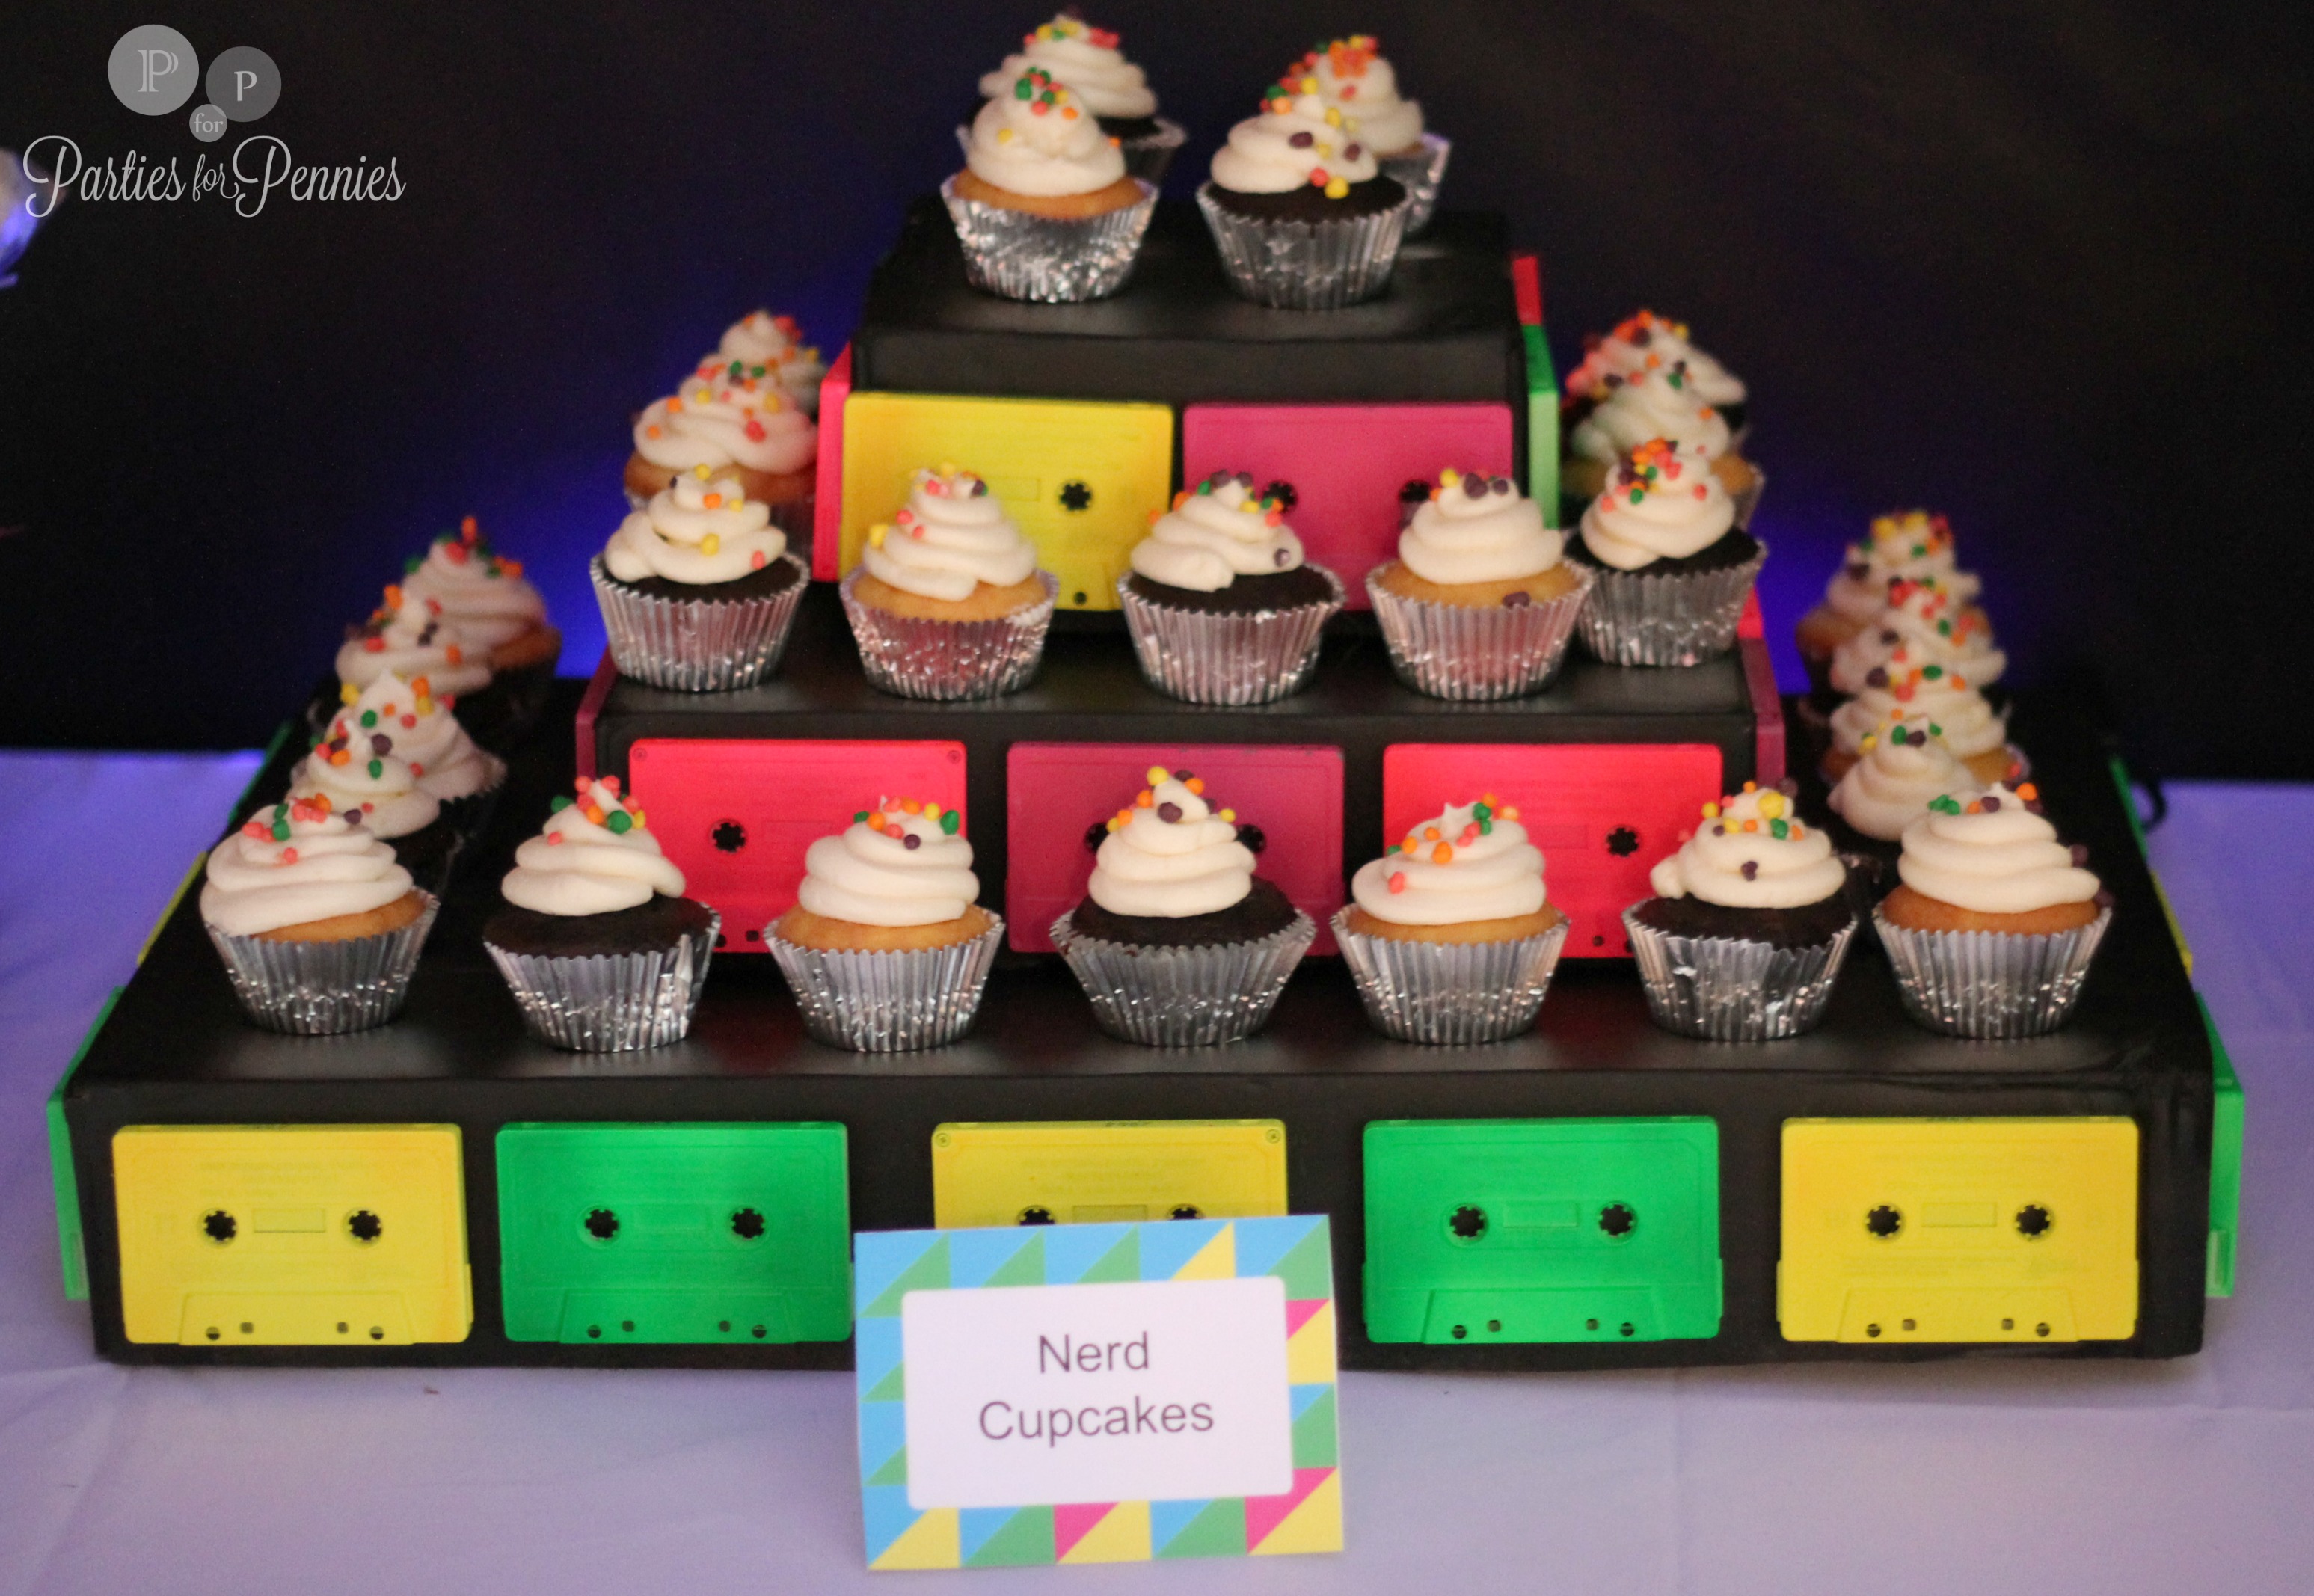 Cake Cups - Parties for Pennies